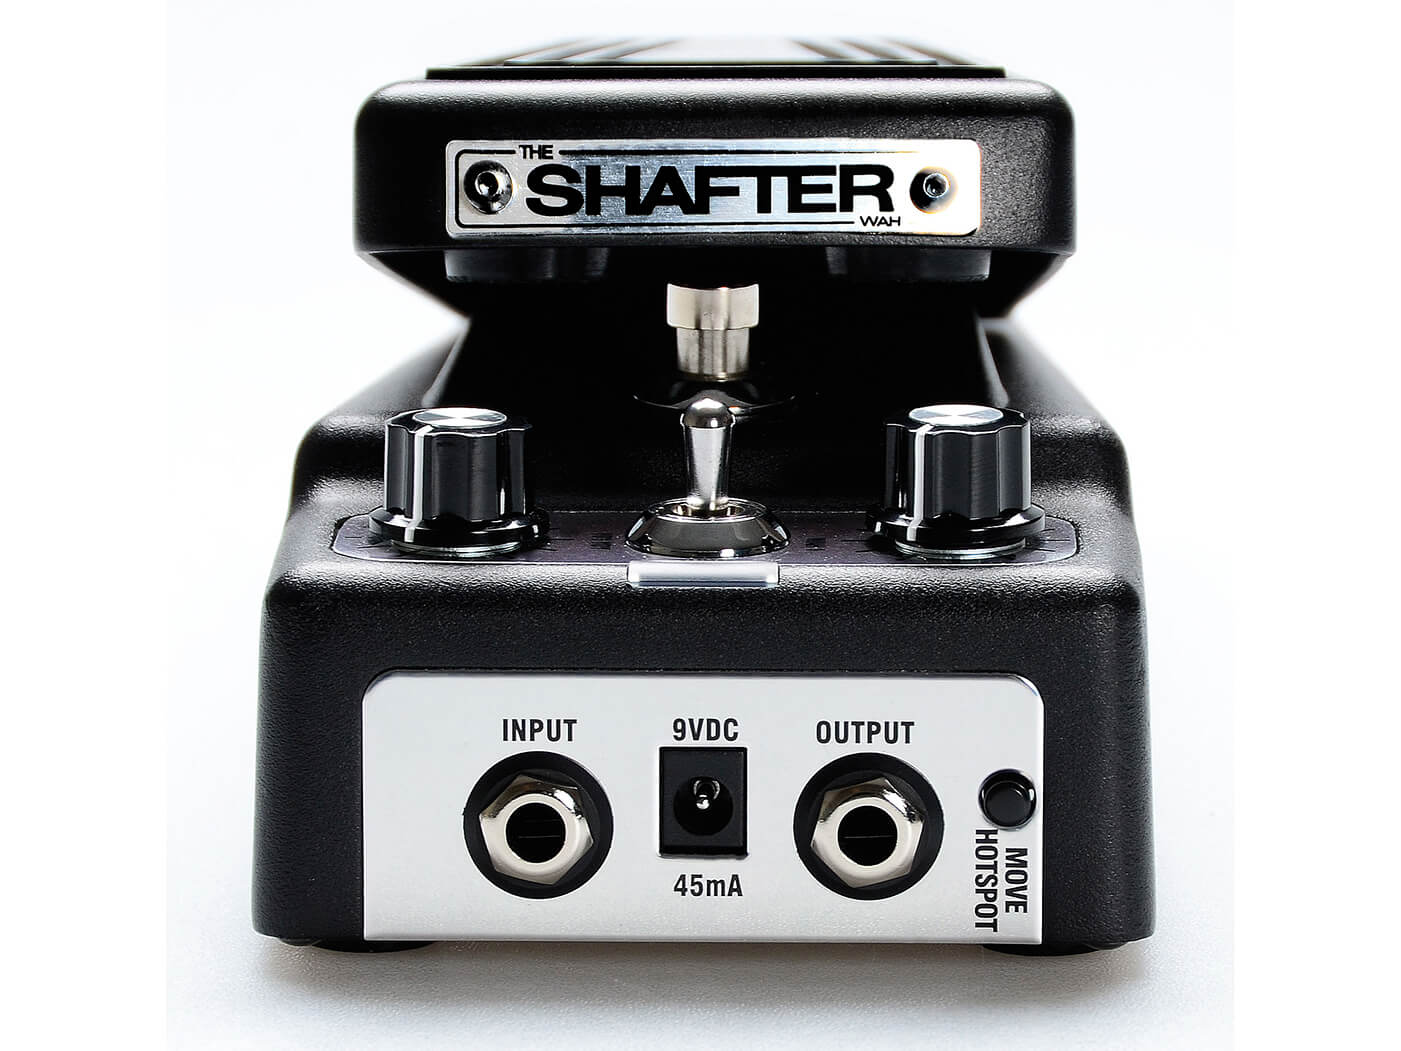 Eight best wah pedals in 2019 | Guitar.com | All Things Guitar